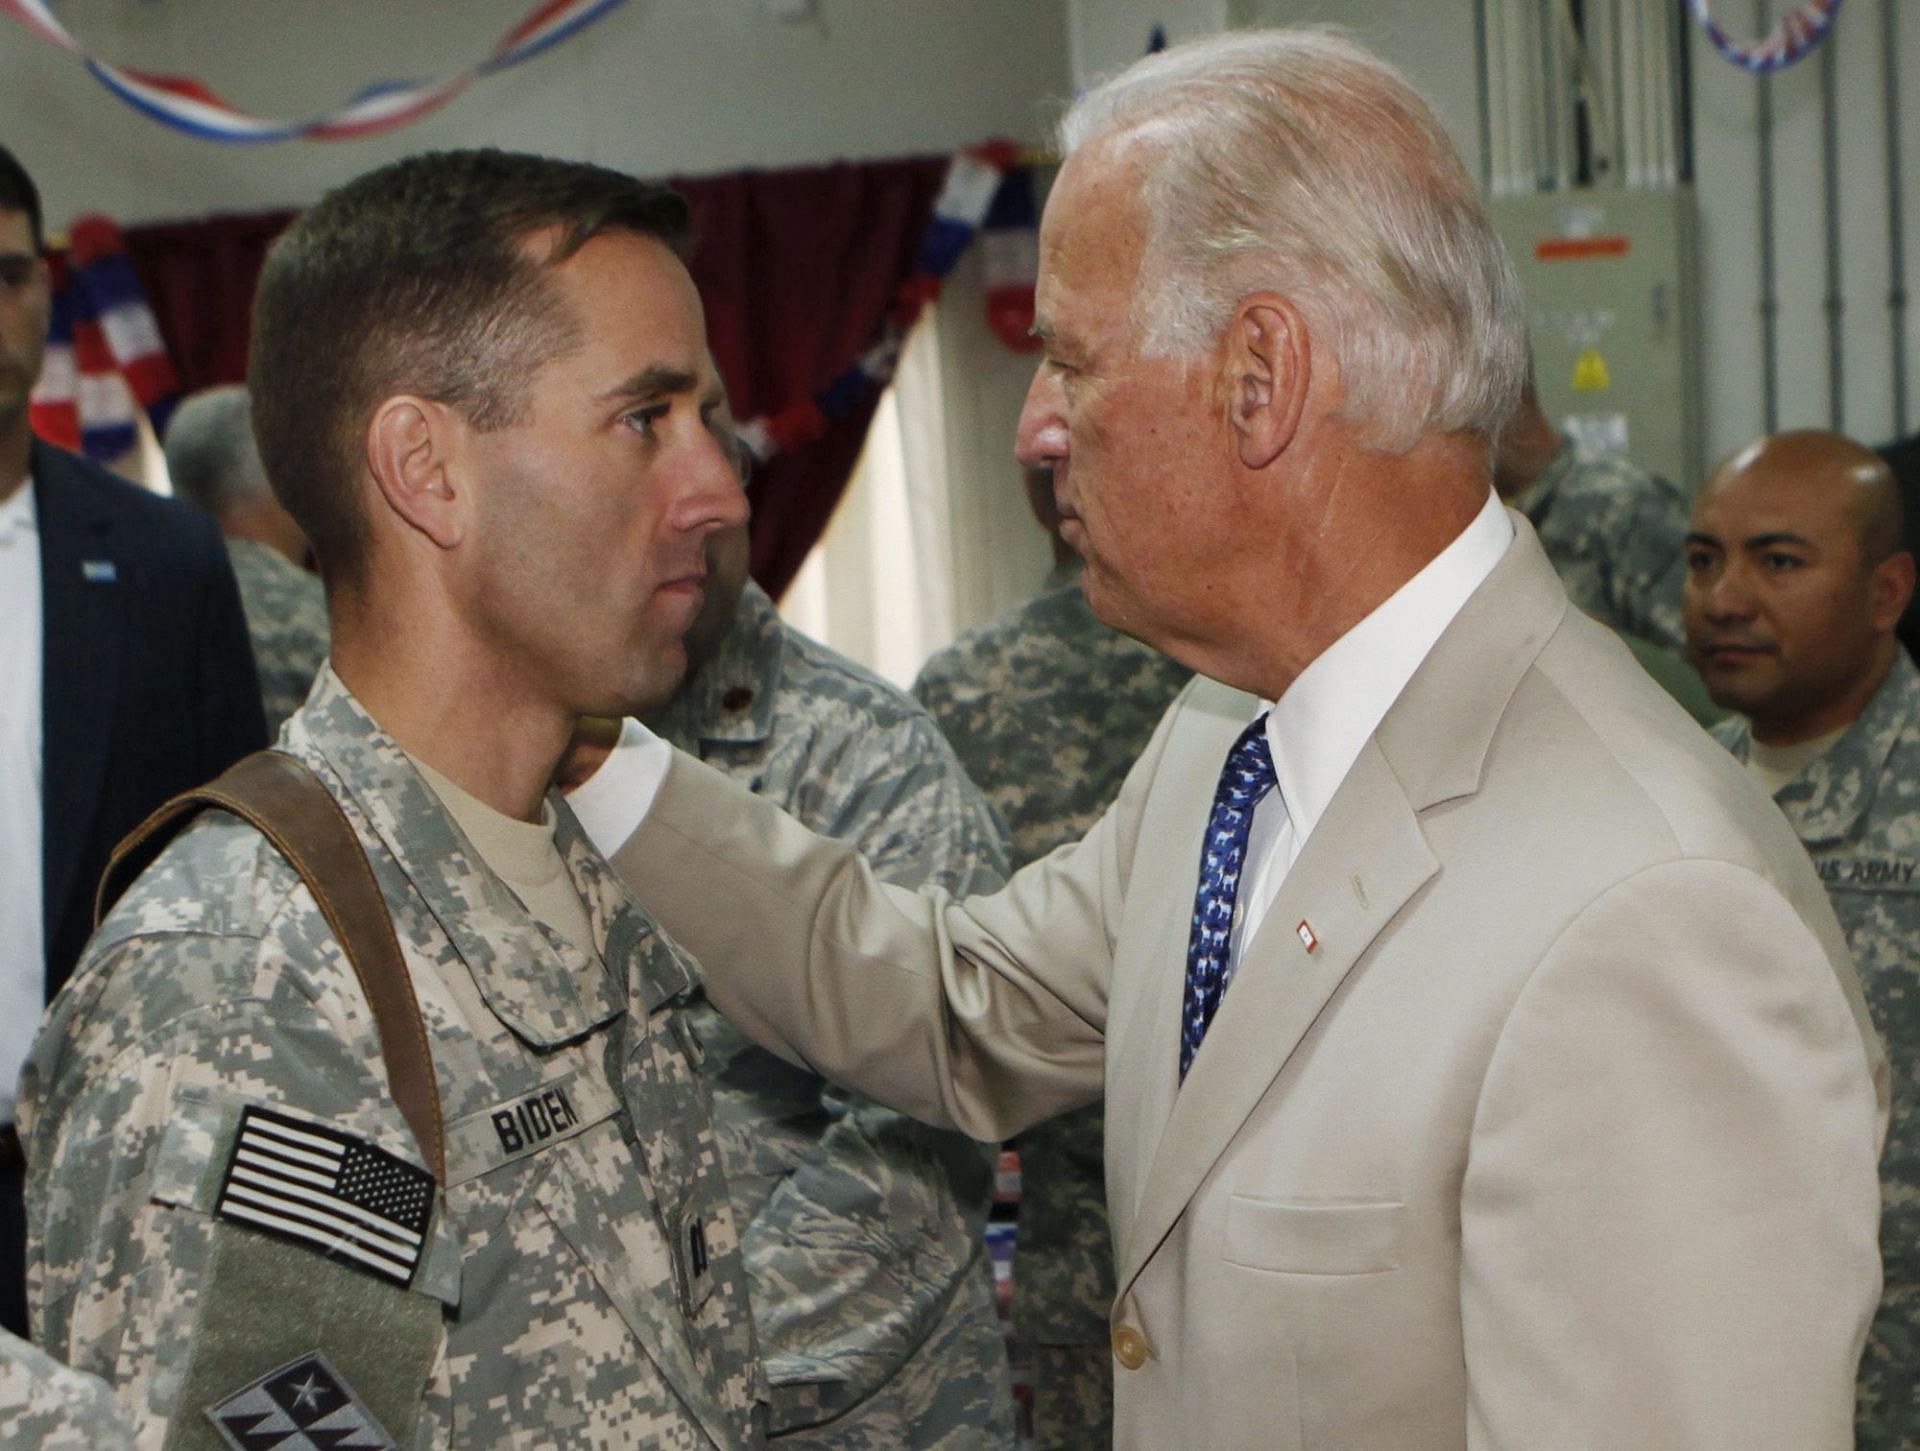 Beau Biden and his father after his return from Iraq (image via AP/Khalid Mohammed)